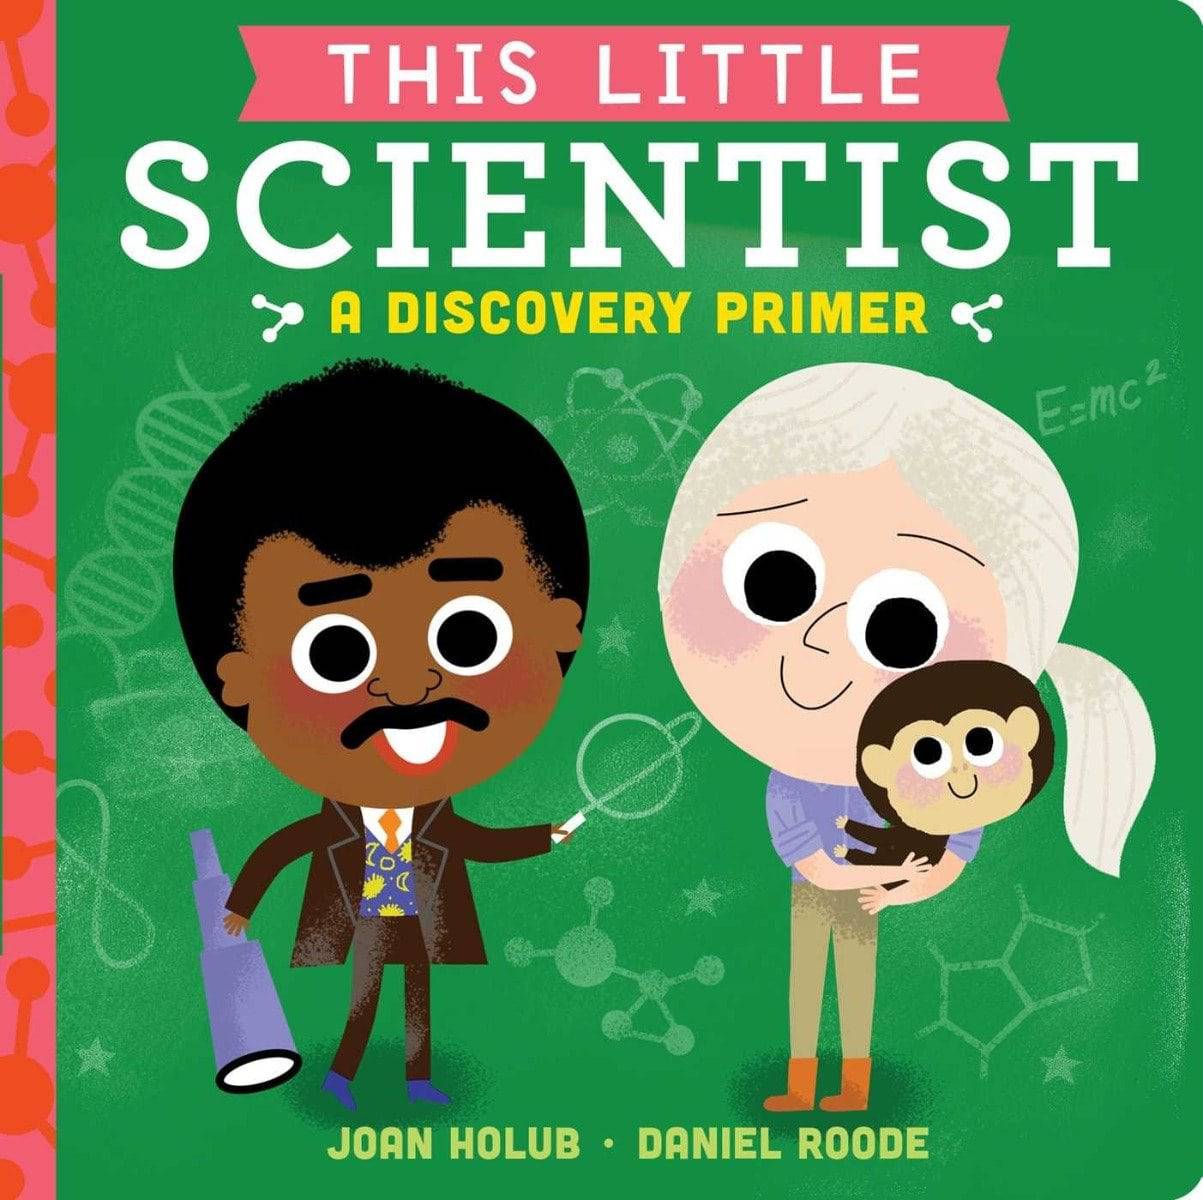 This Little Scientist: A Discovery Primer Book - Twinkle Twinkle Little One